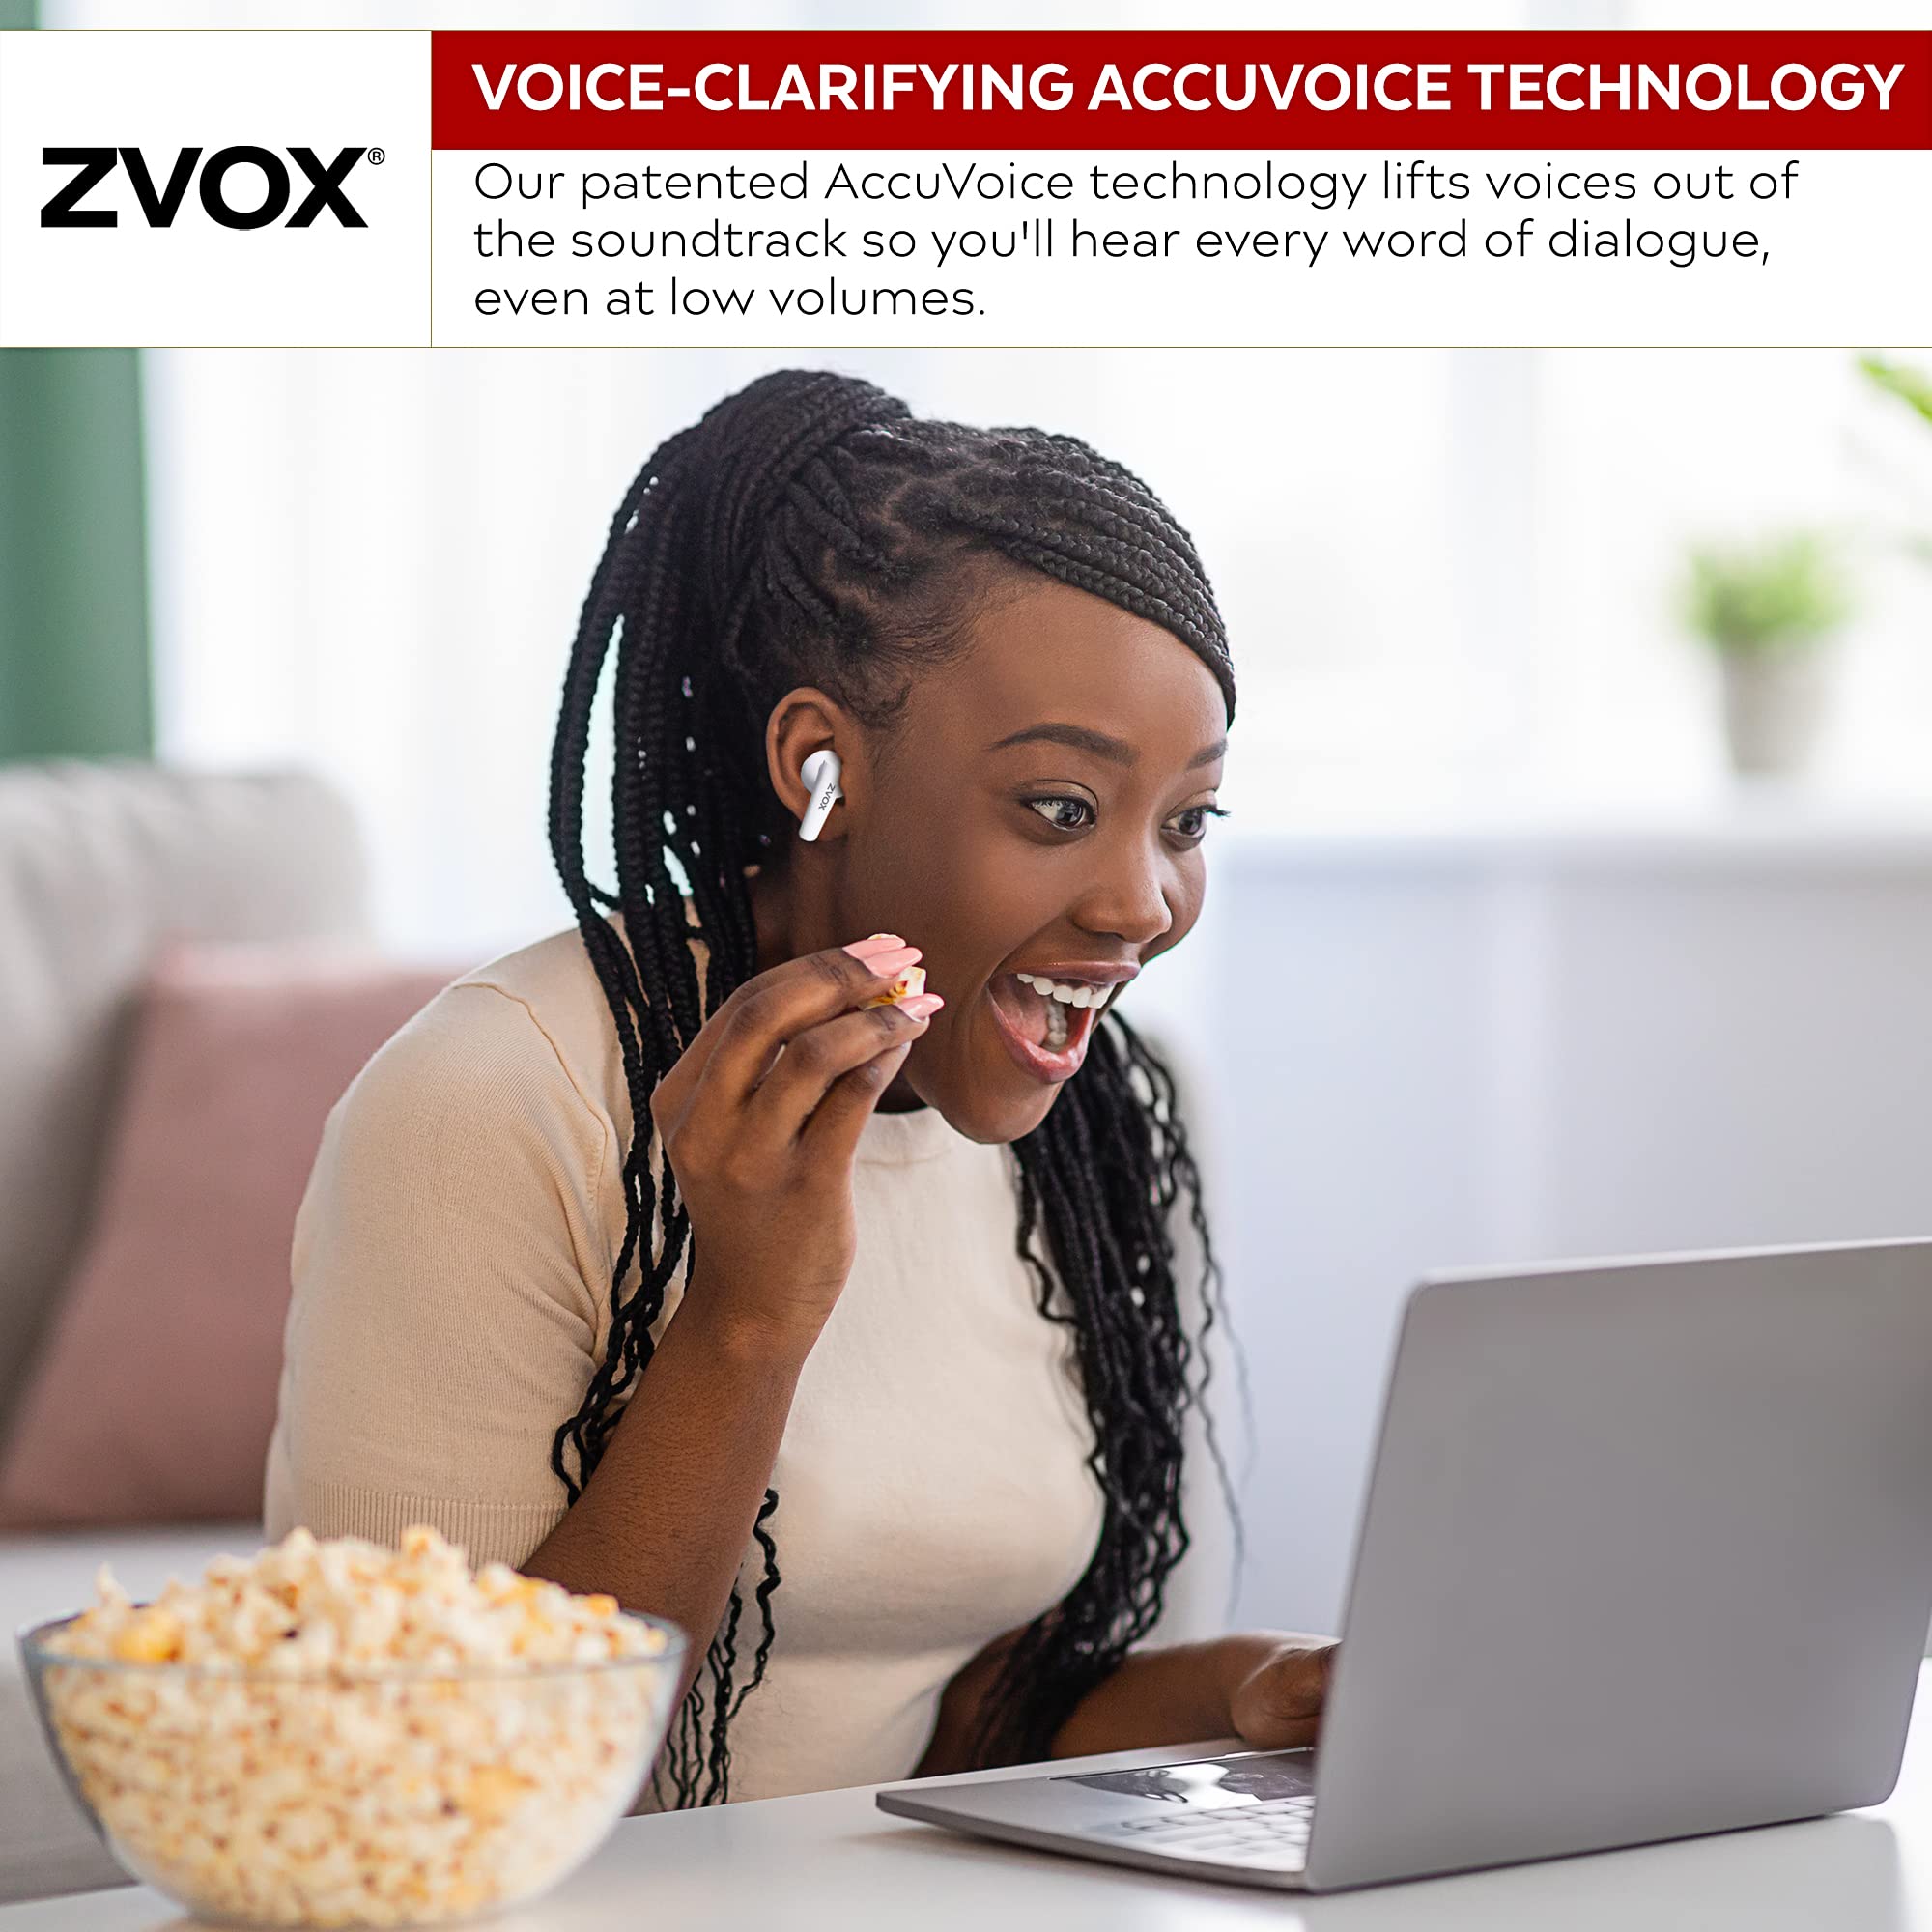 ZVOX True Wireless Earbuds with AccuVoice Technology - Voice-Clarifying, Noise-Canceling Bluetooth Wireless Headphones, AV30 Connect to Multiple Devices, Earbuds Wireless Bluetooth - White